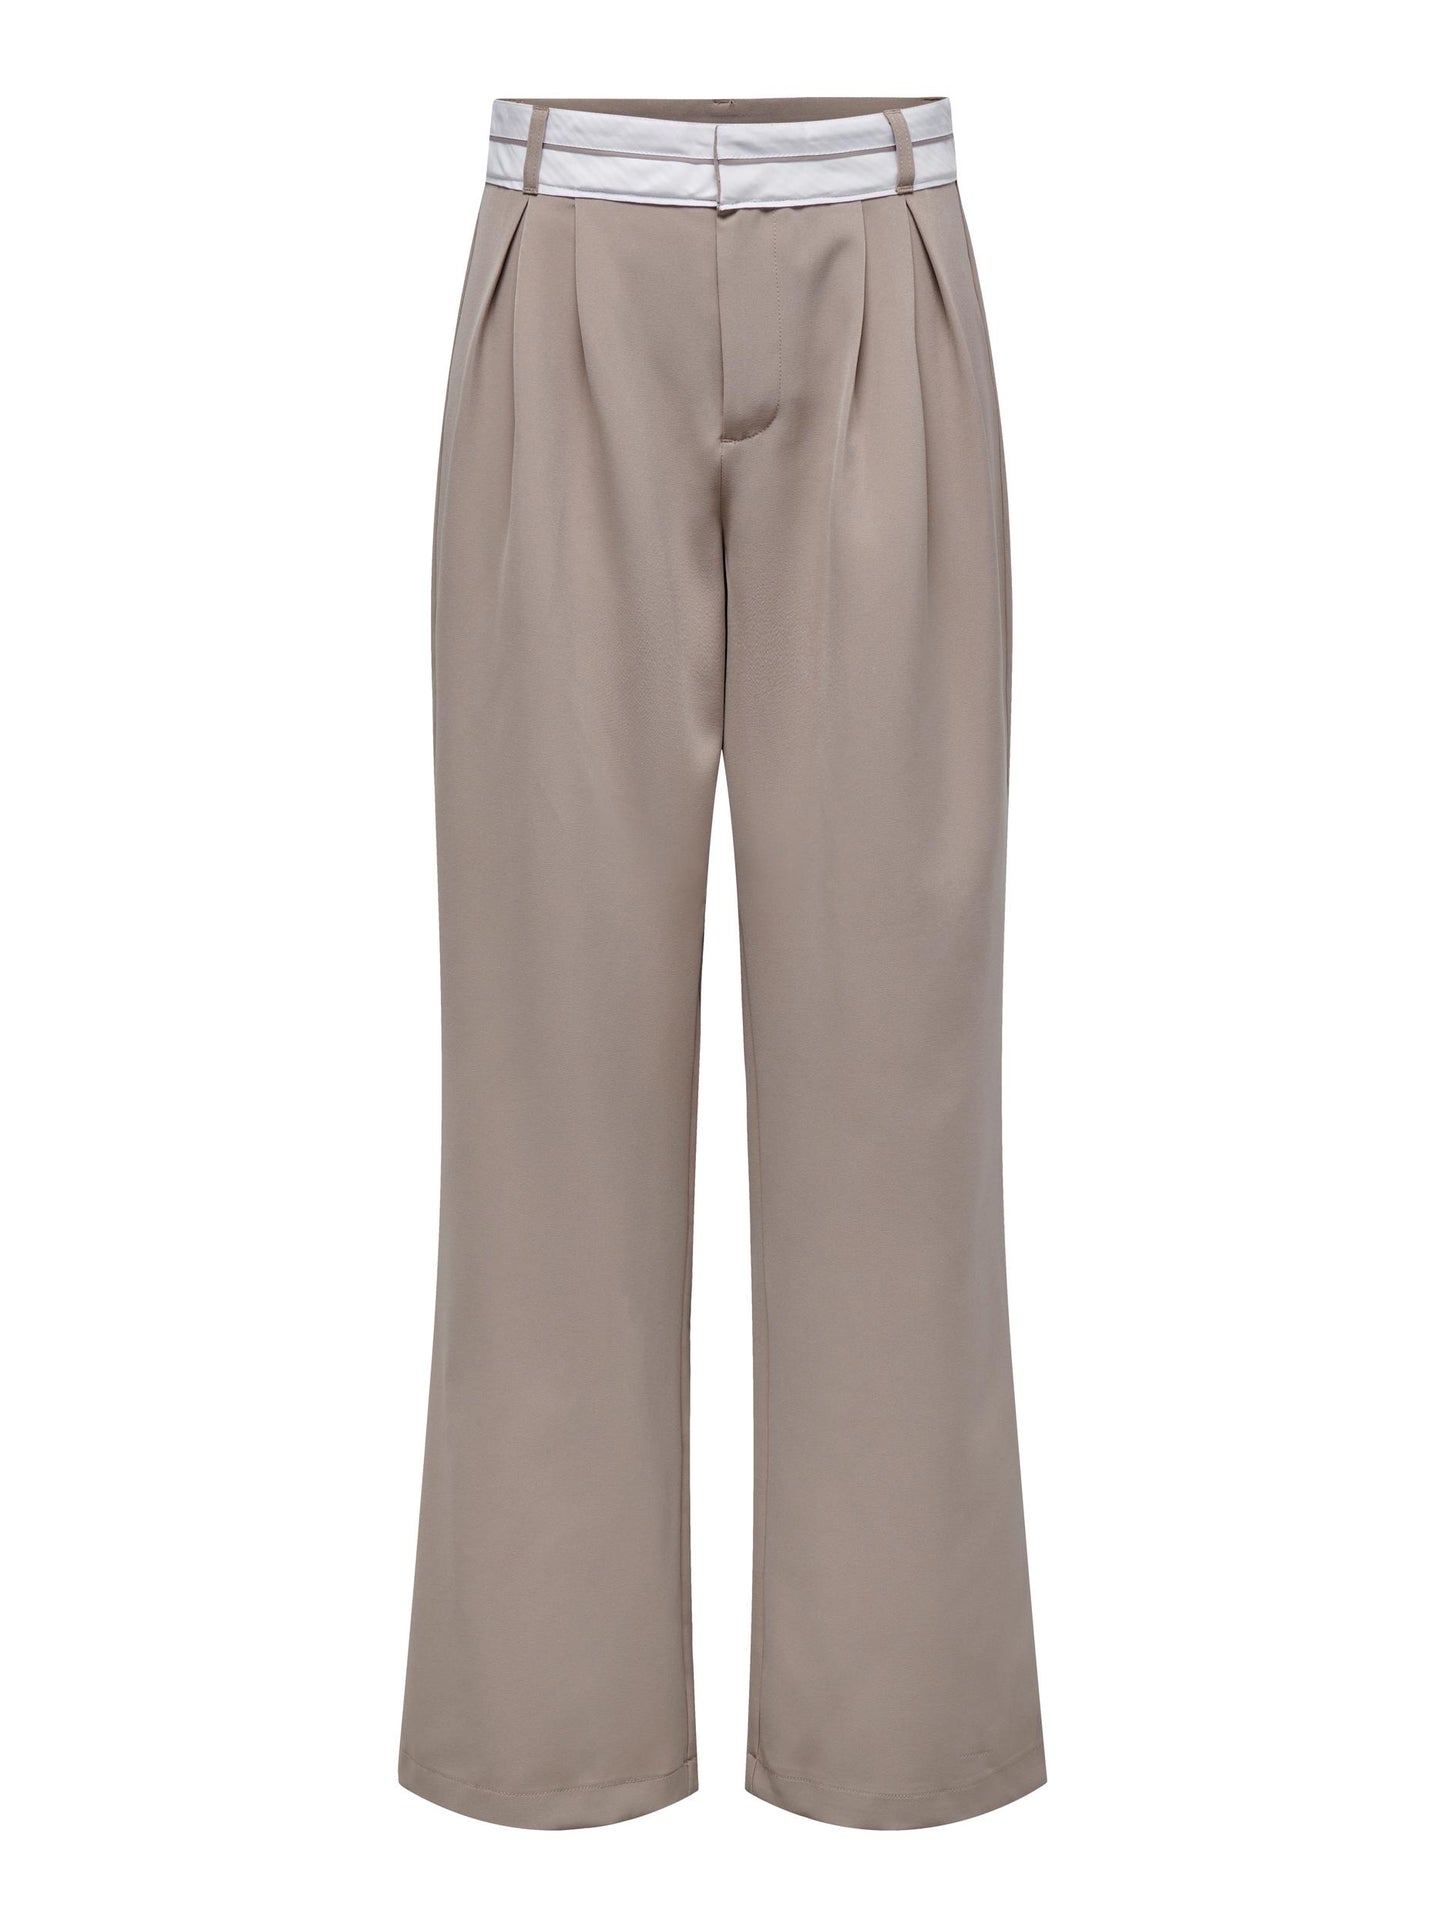 ONLY Malika Wide Leg Relaxed Dad Trousers with Rolled Waistband in Beige - One Nation Clothing